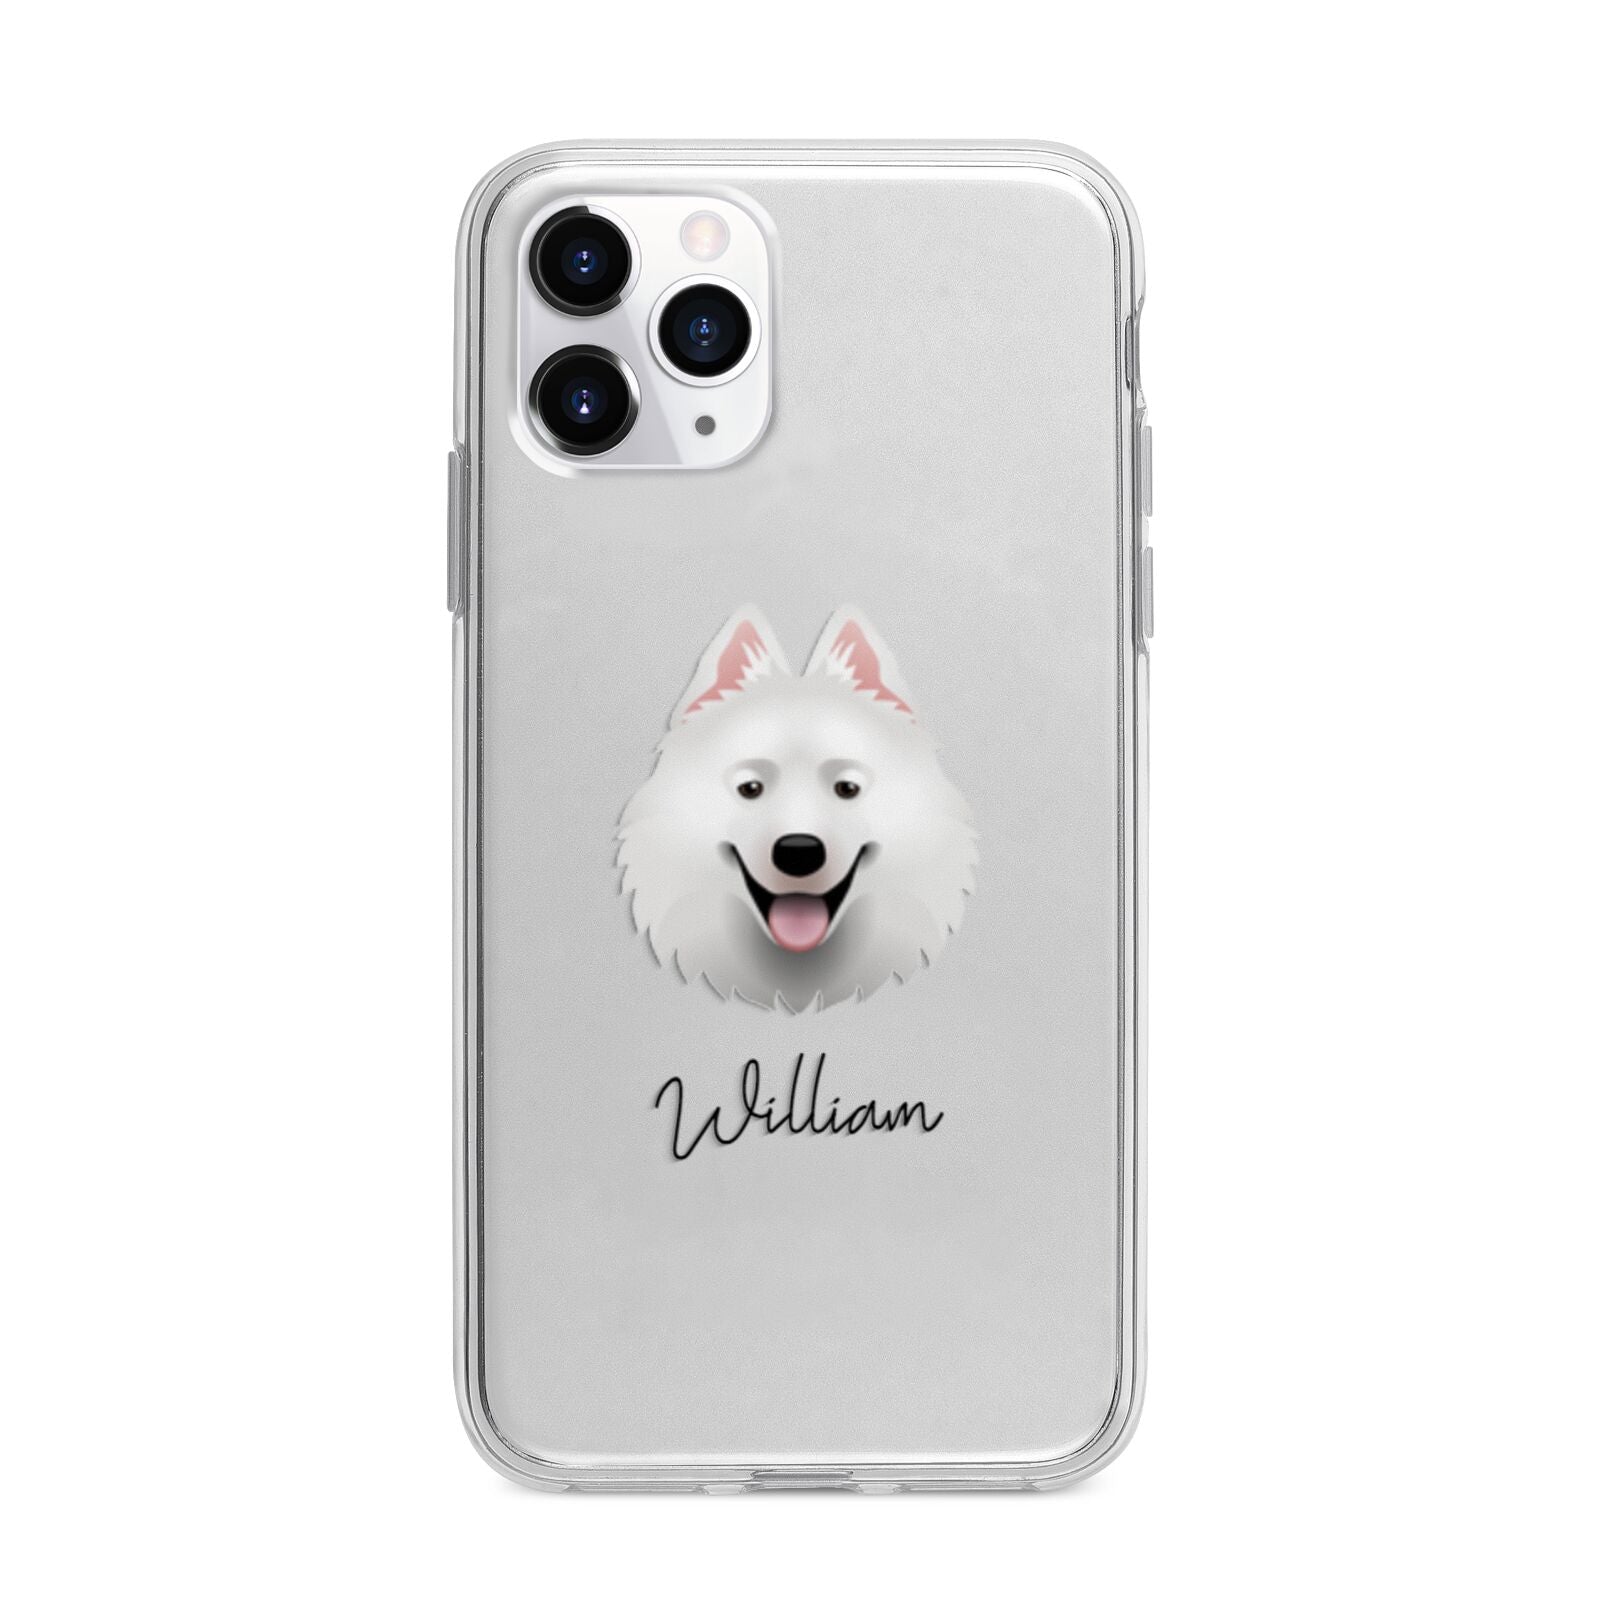 Samoyed Personalised Apple iPhone 11 Pro Max in Silver with Bumper Case